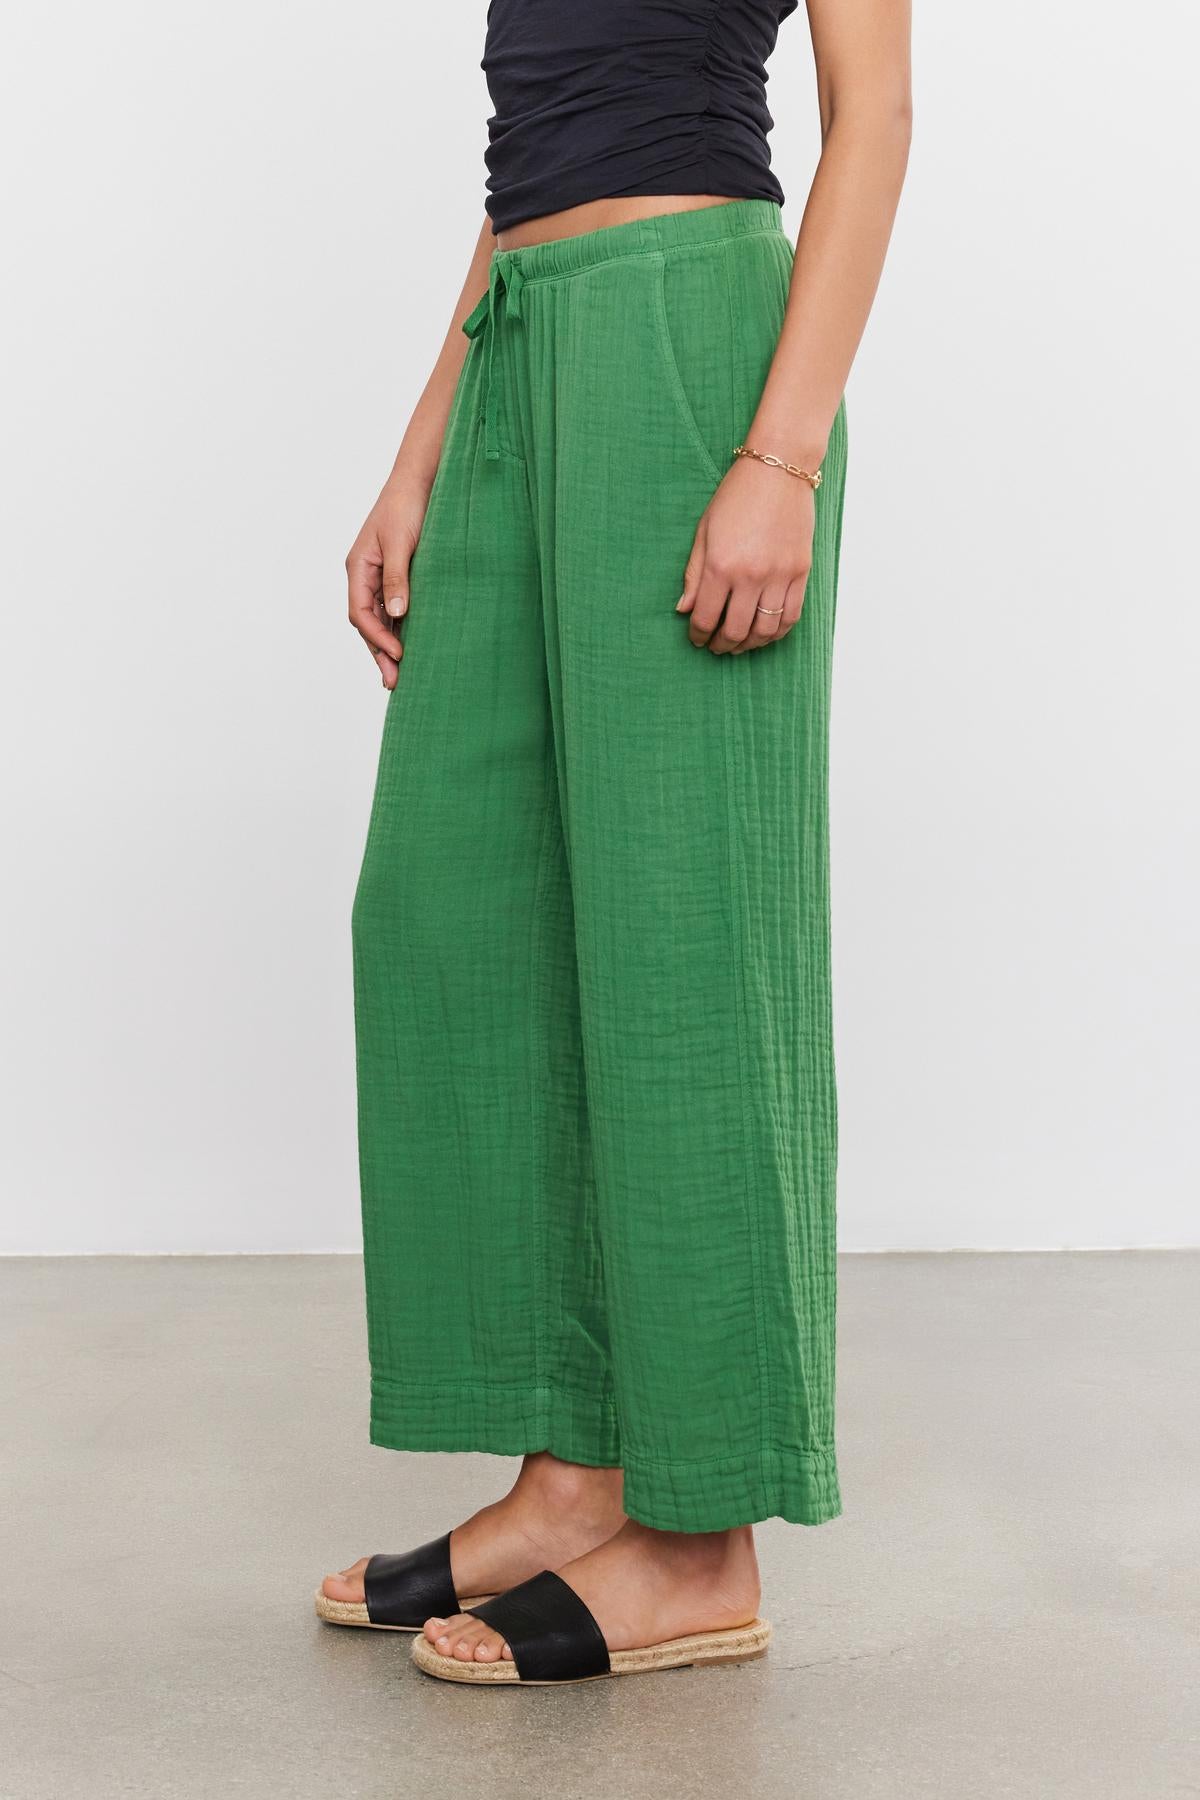 A person wearing green FRANNY COTTON GAUZE PANTS by Velvet by Graham & Spencer with relaxed legs and slash pockets, paired with black slide sandals, standing against a white background.-36917078327489